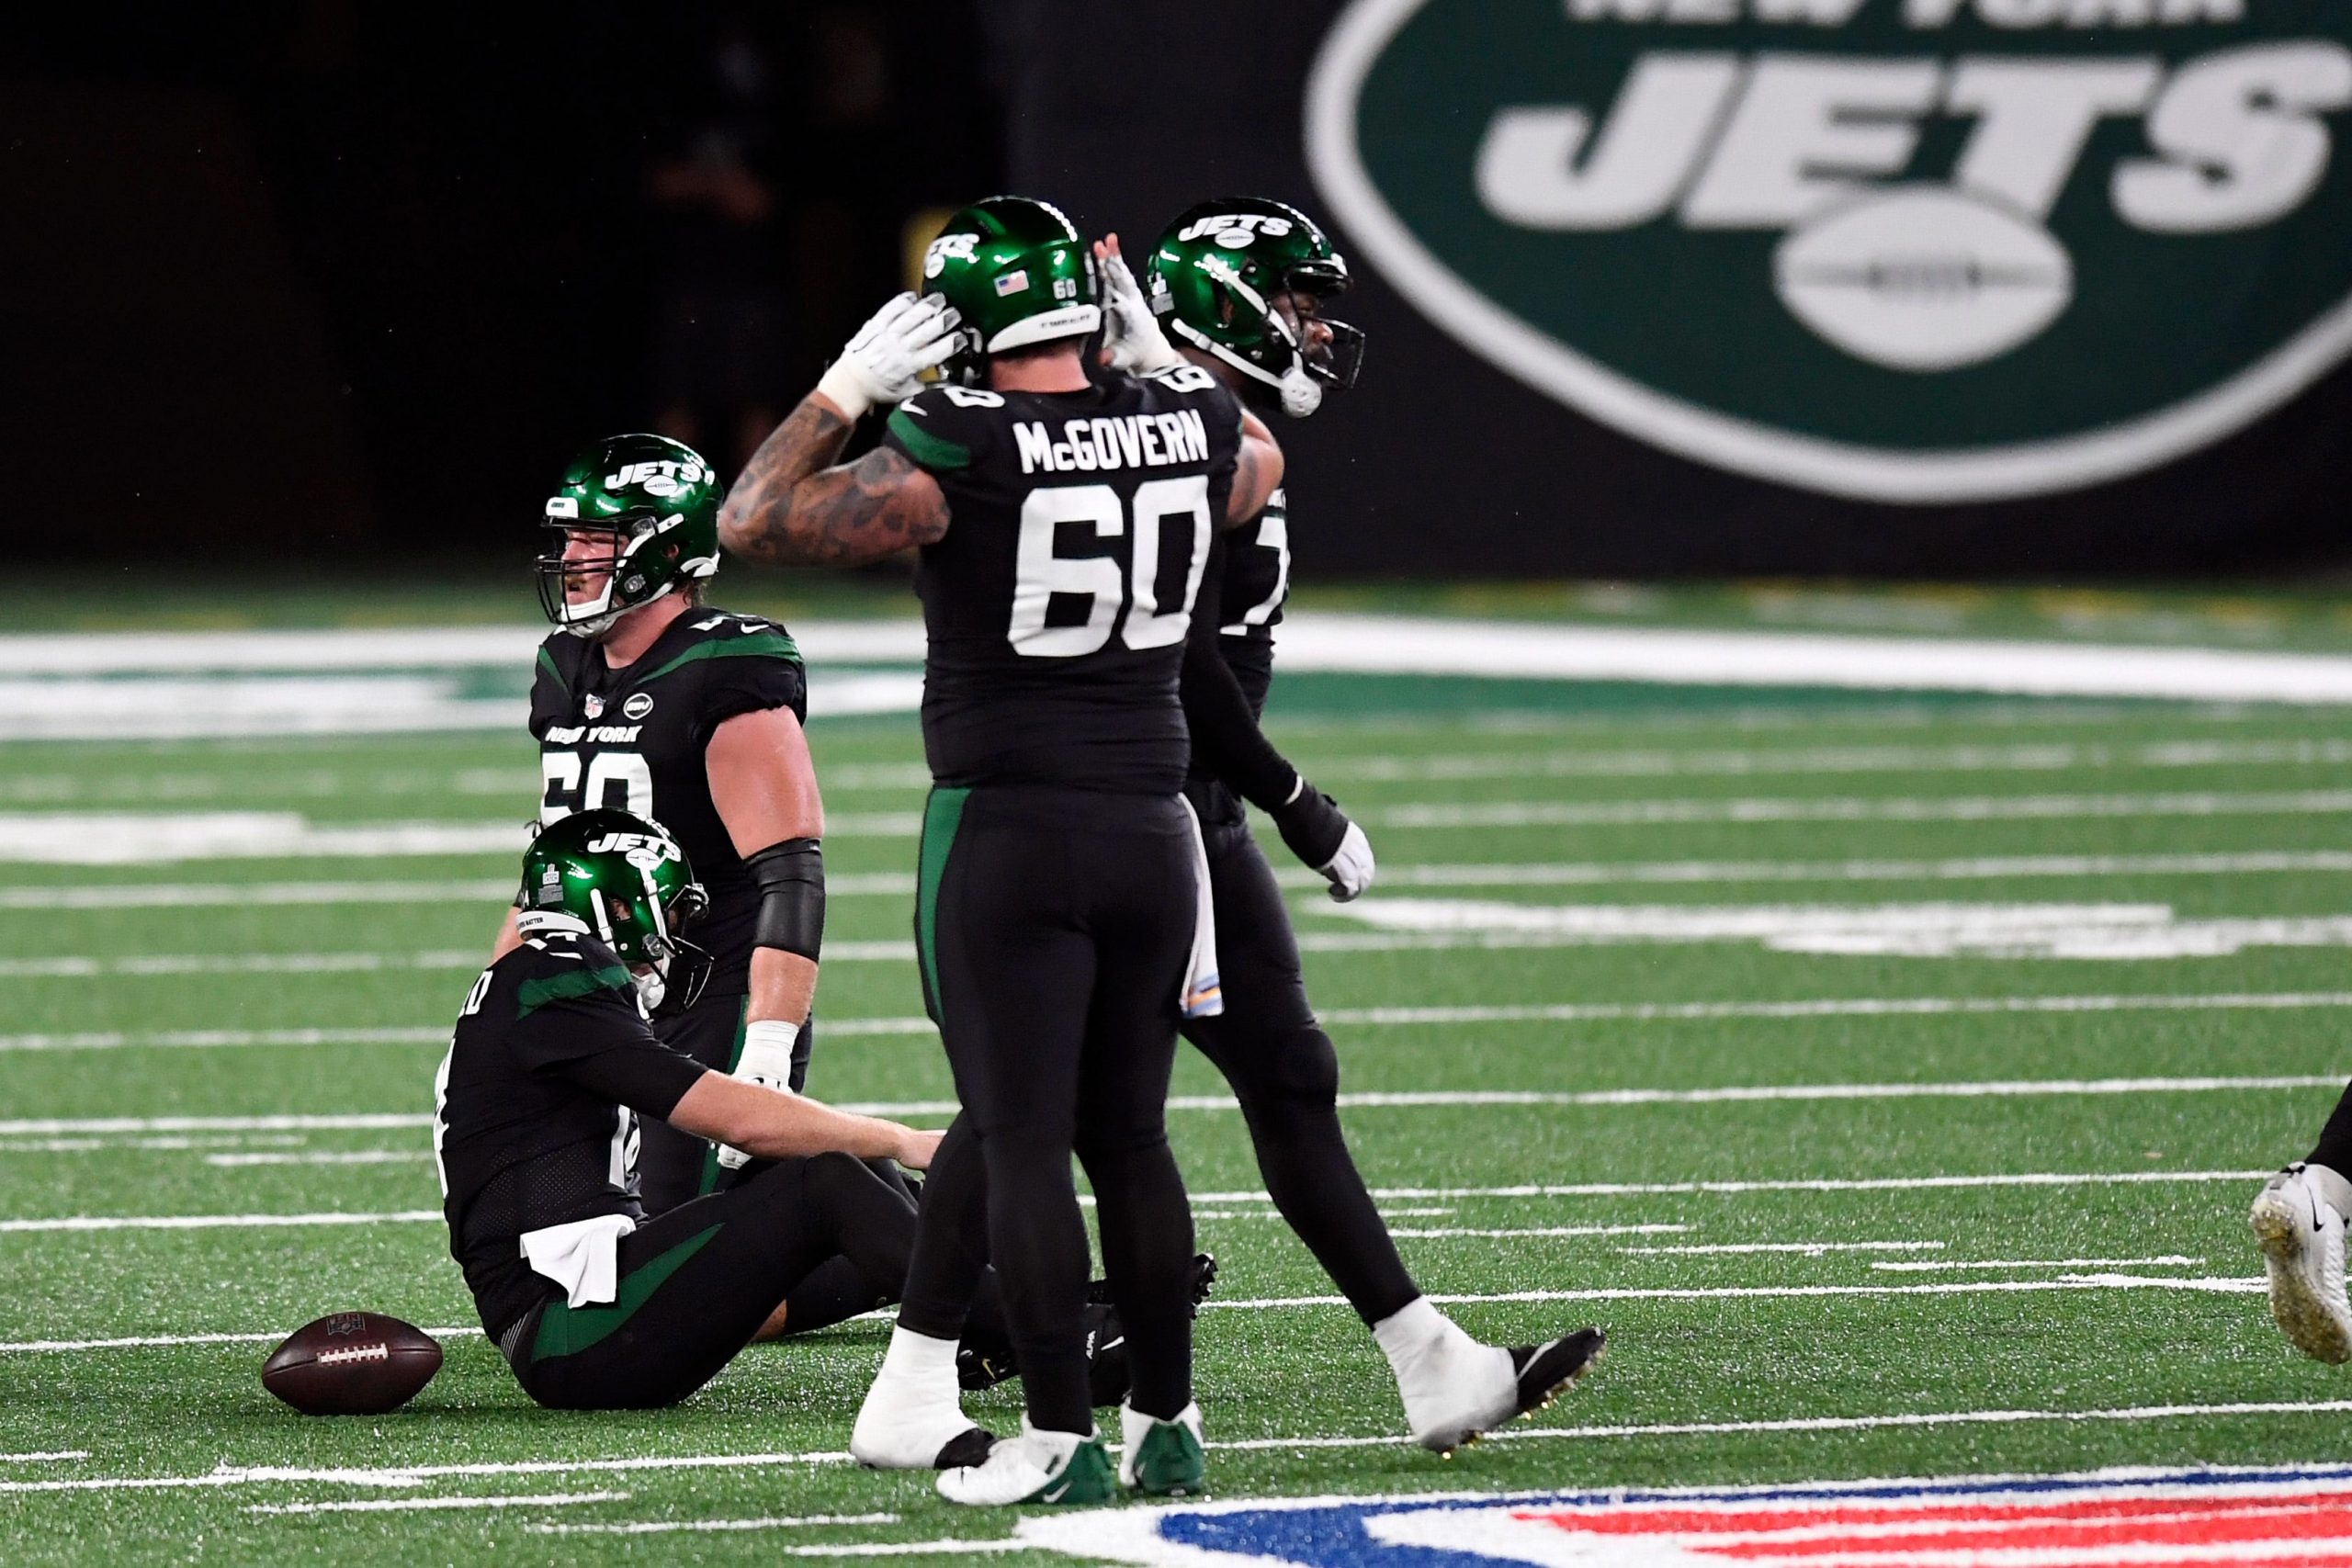 New York Jets quarterback Sam Darnold (14) and the offense cannot convert on downs late in the fourth quarter. The Jets lose to the Broncos, 37-28, at MetLife Stadium on Thursday, Oct. 1, 2020.